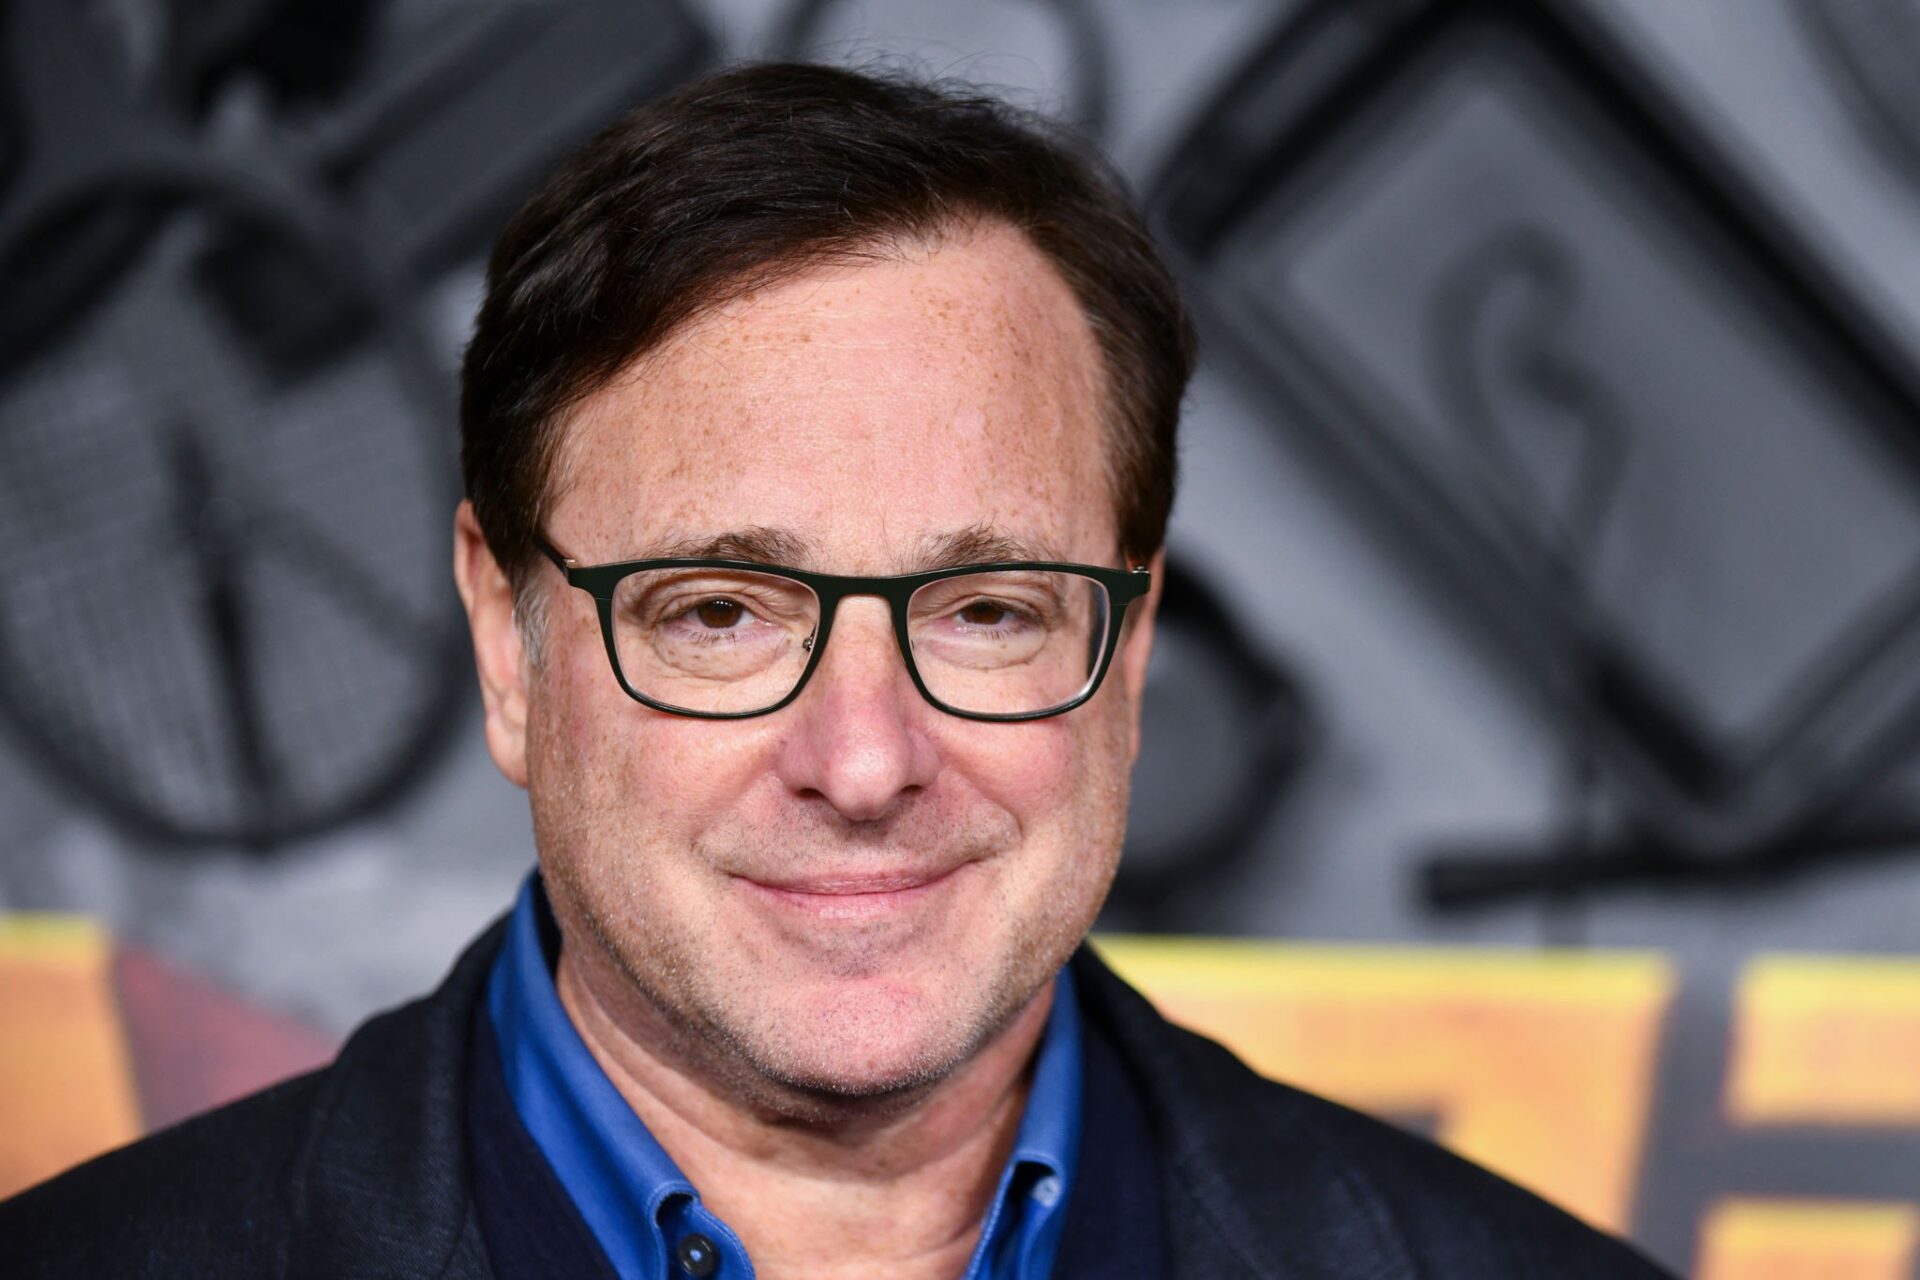 Bob Saget Biography: Age, Net Worth, Instagram, Spouse, Height, Wikipedia, Parents, Siblings, Awards, Songs, Movies, Death